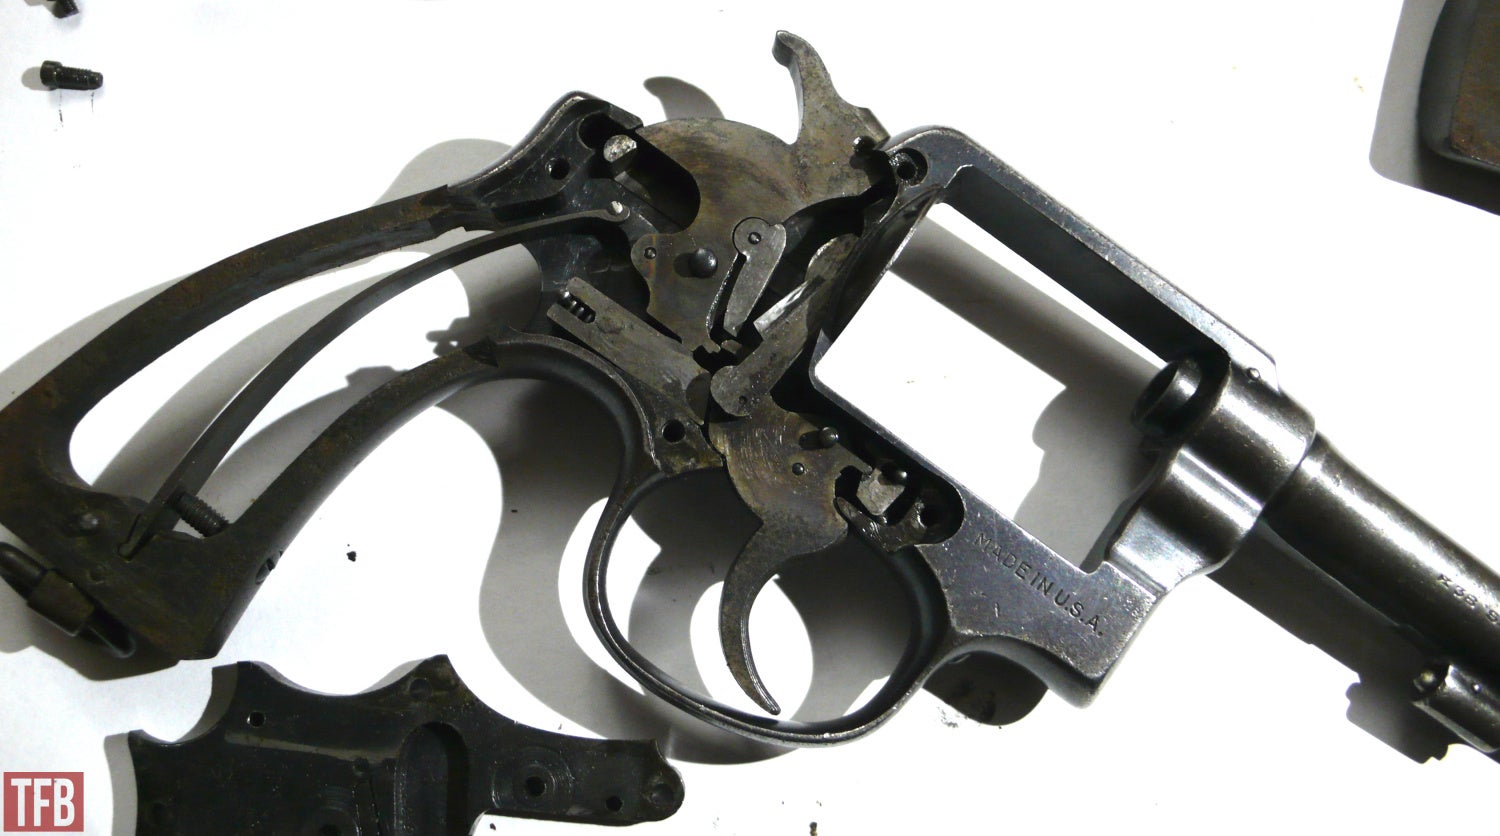 lend-lease S&W Victory revolver